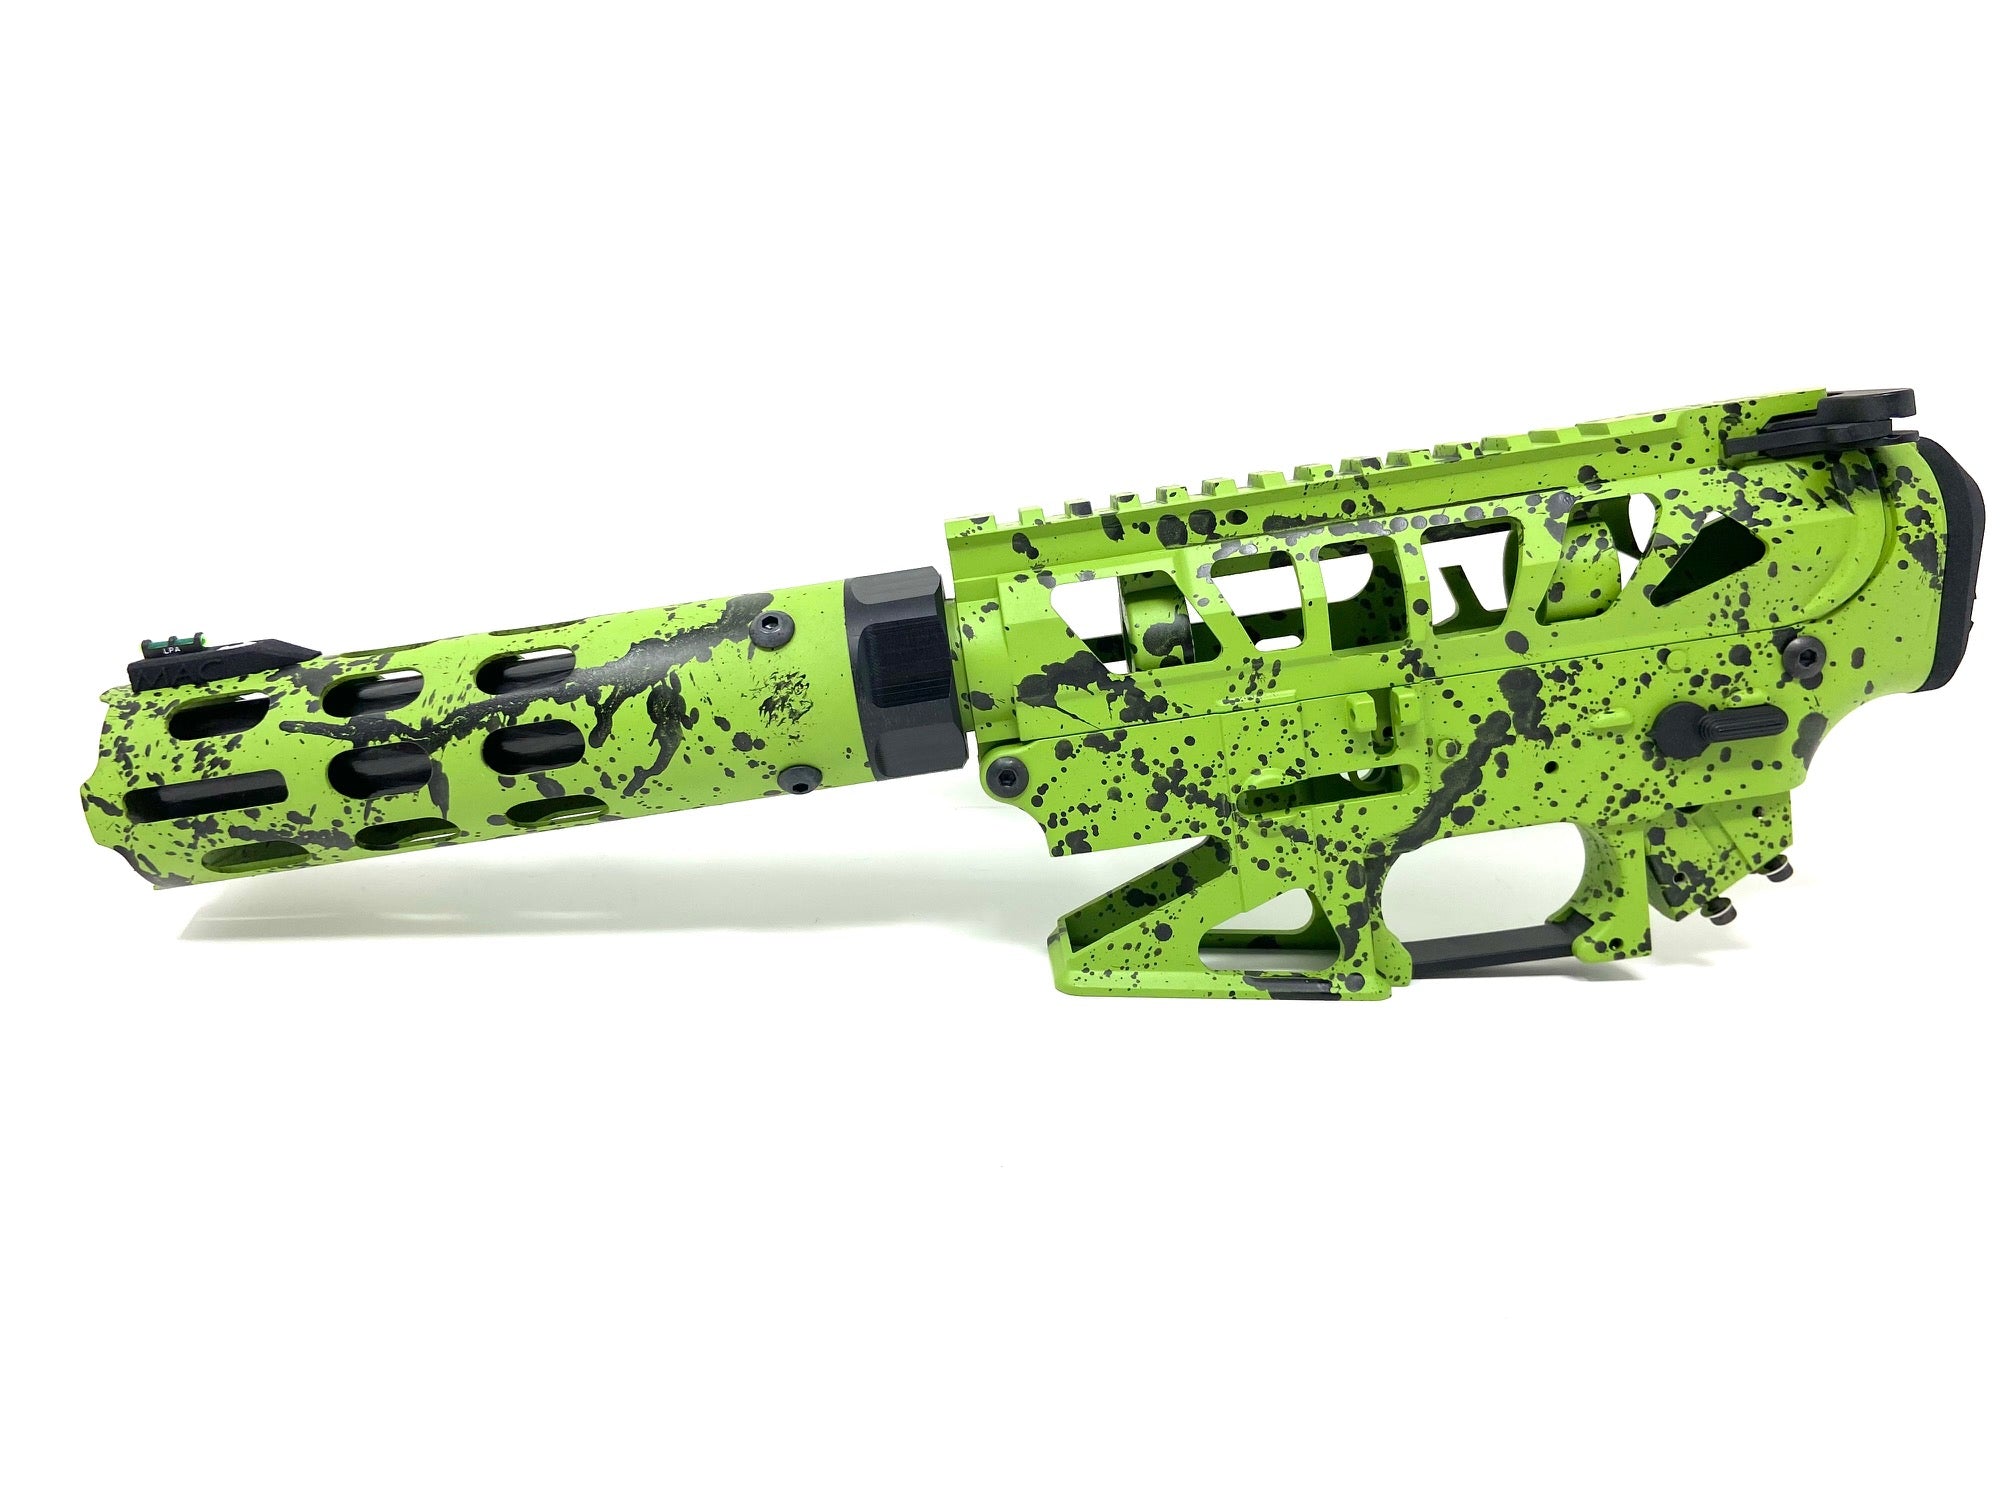 This setup is a SS Airsoft Exclusive from MAC Customs!  Get your one of a kind built external setup now!   Available in multiple colors! This package includes:  MAC Custom cerakoted  Metal Body upper and lower  MAC Customs matching carbon fiber Handguard with front sight  MAC Custom Carbon Fiber Pom outer barrel with threads and cover for small tracer  MAC Custom Cerakoted matching gearbox  MAC Custom Receiver End cap     Perfect for your next HPA or AEG build!  Get yours today only at SS Airsoft!!   